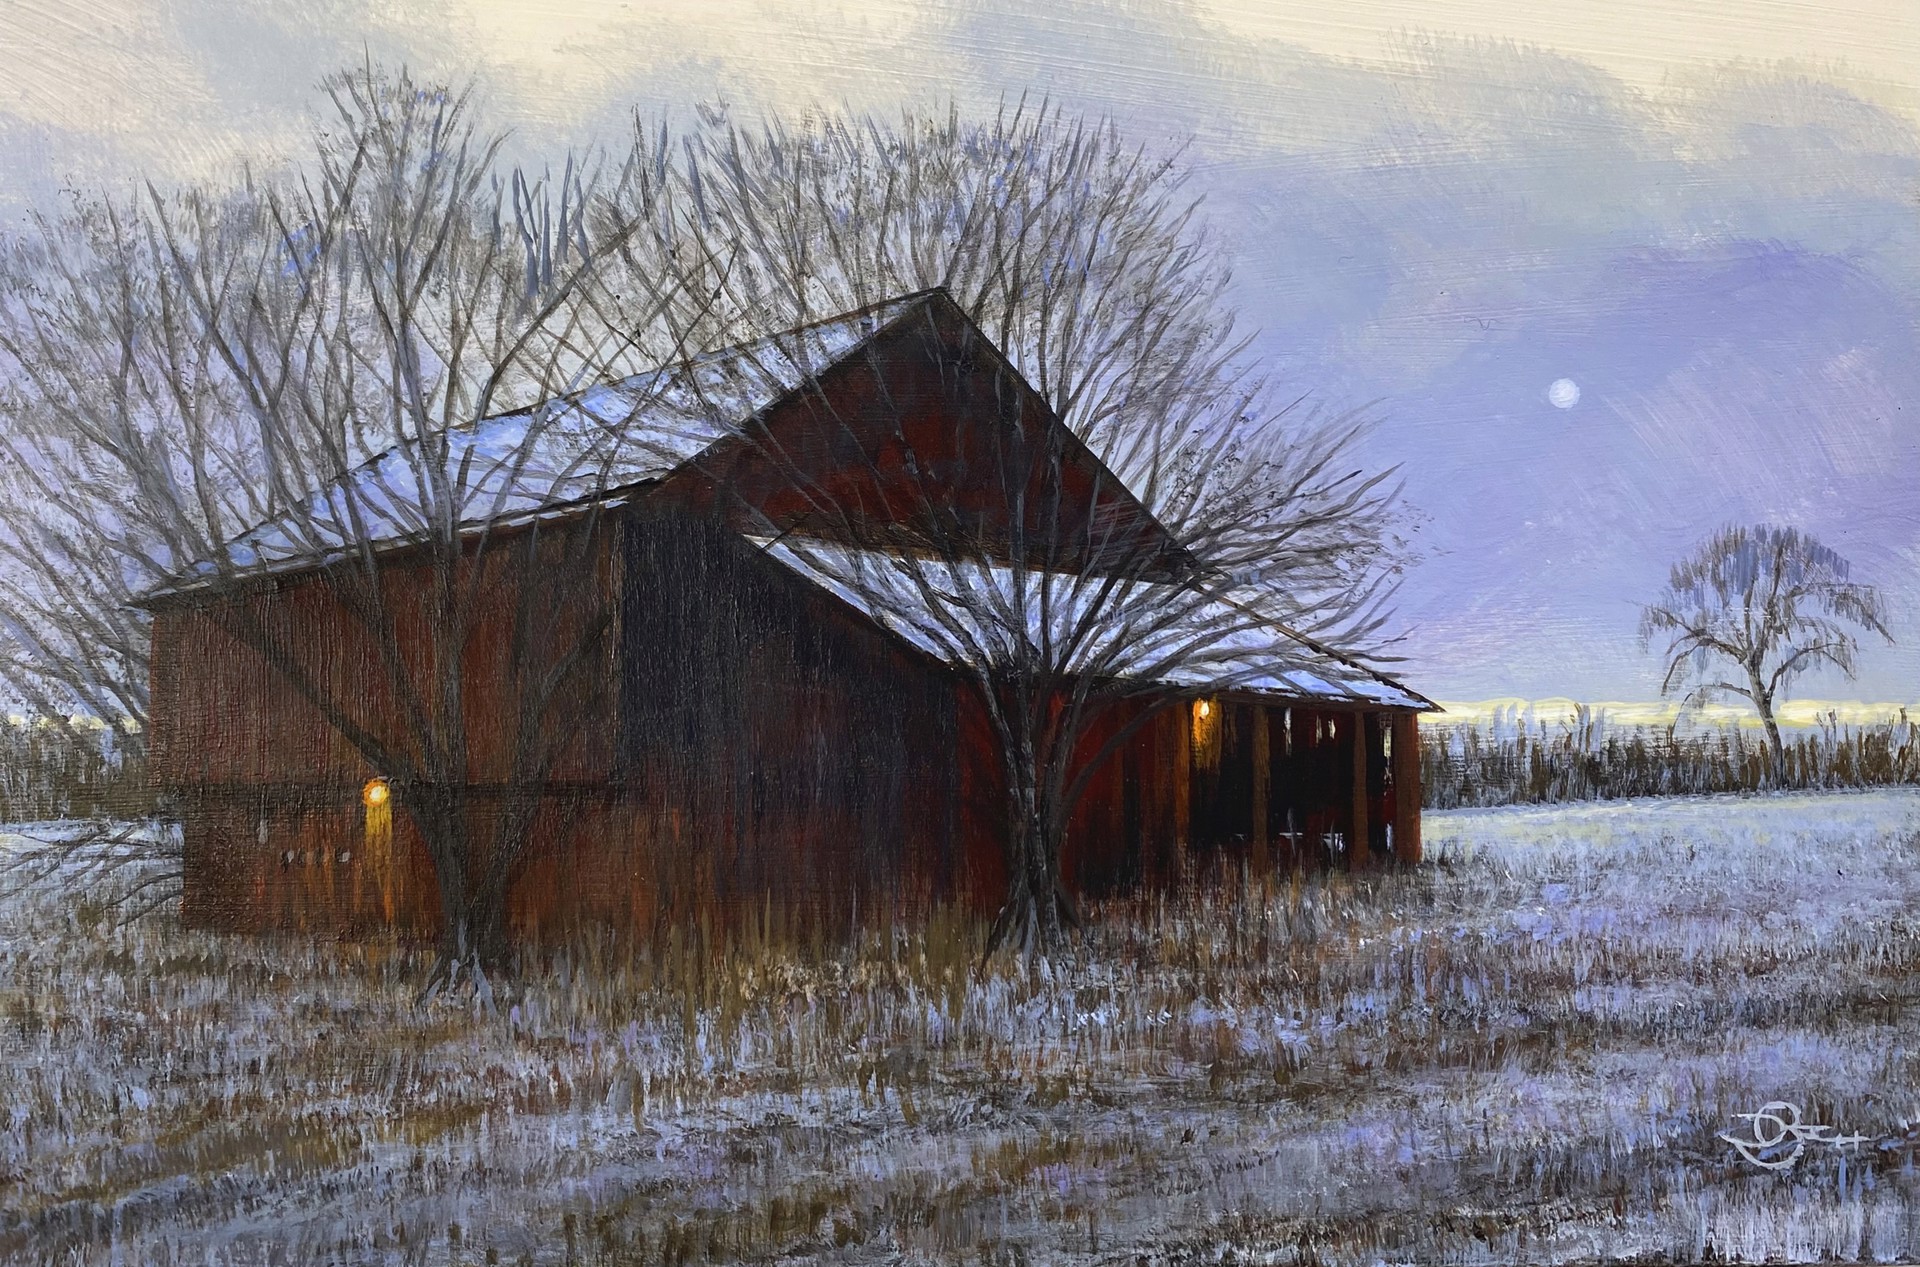 Winter Work by Del-Bourree Bach